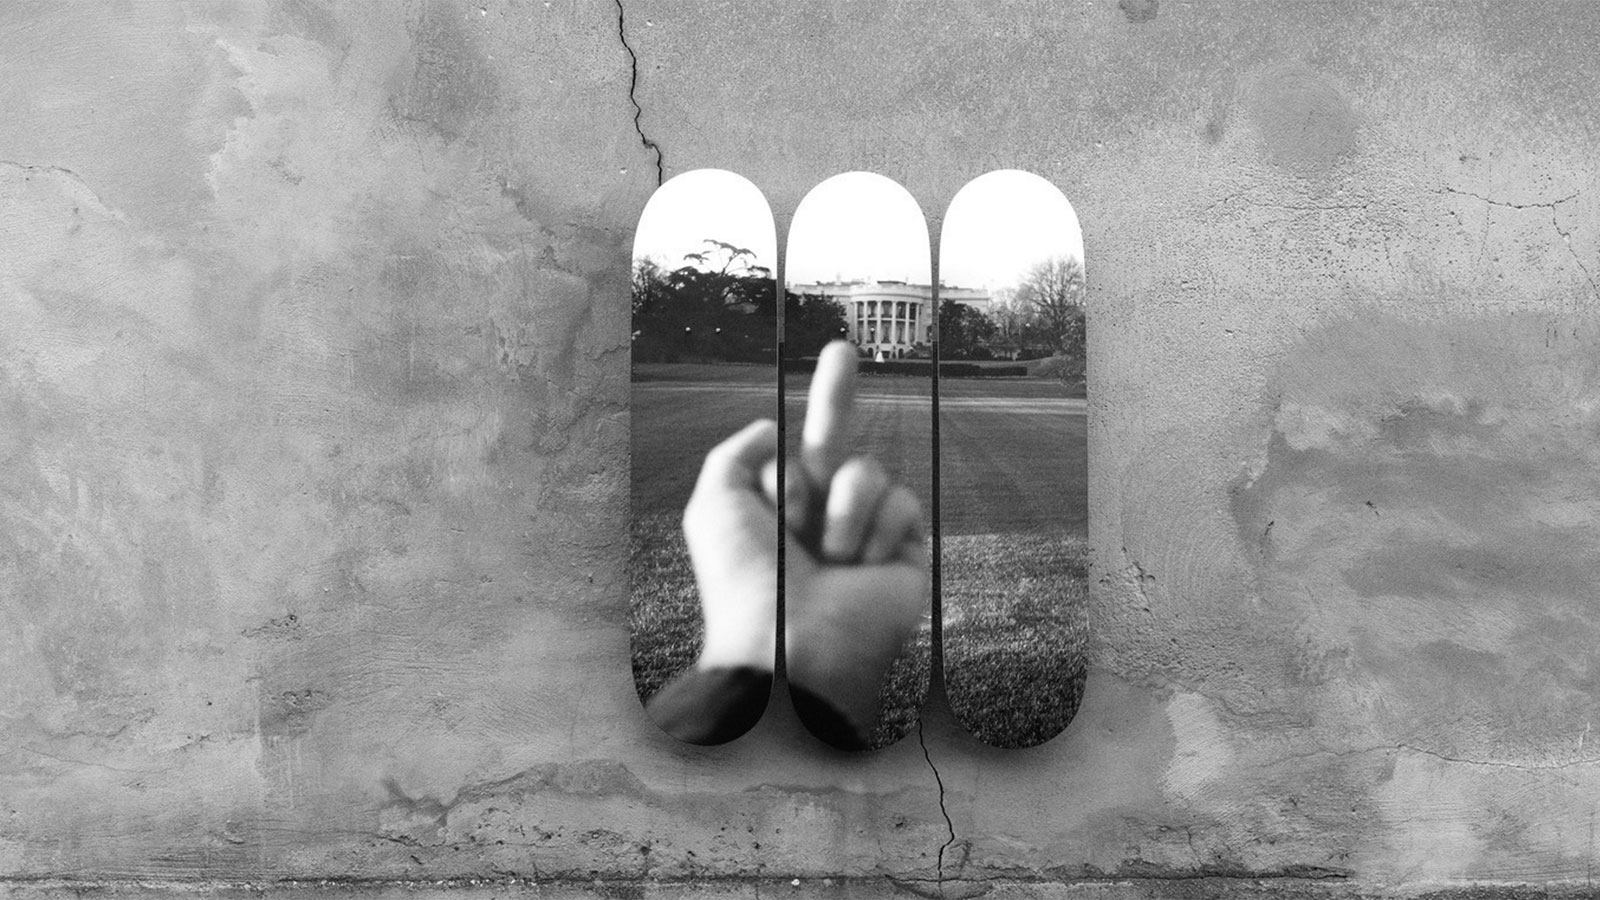 STUDY OF PERSPECTIVE - THE WHITE HOUSE 2017 SKATE DECKS